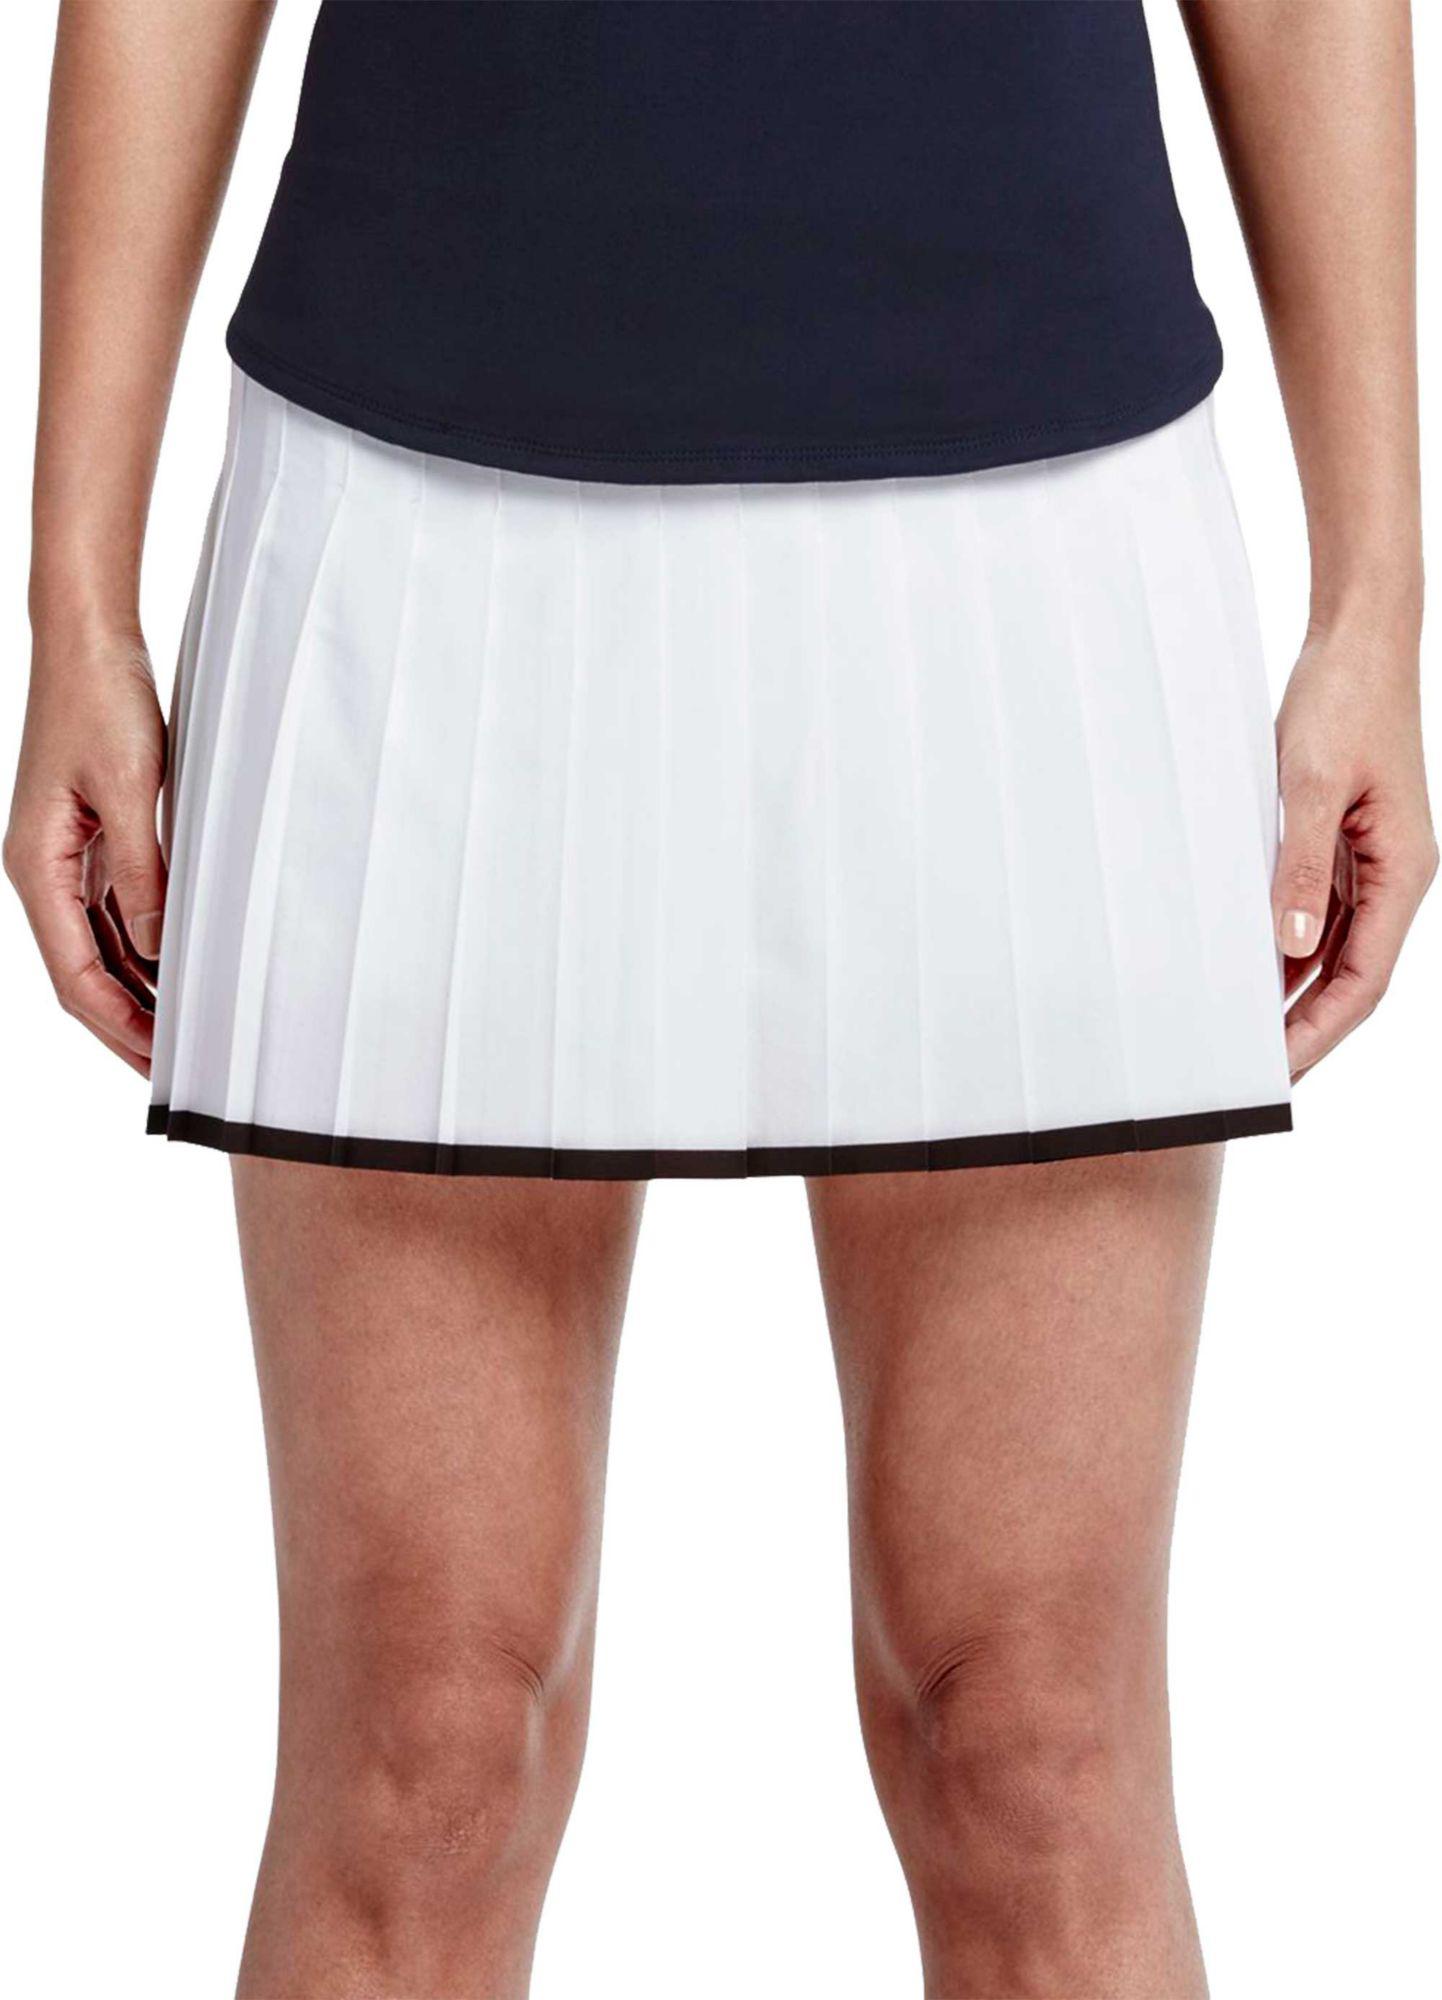 Nike Synthetic Court Victory Wide Band Tennis Skirt in White/Black/Black  (Black) - Lyst